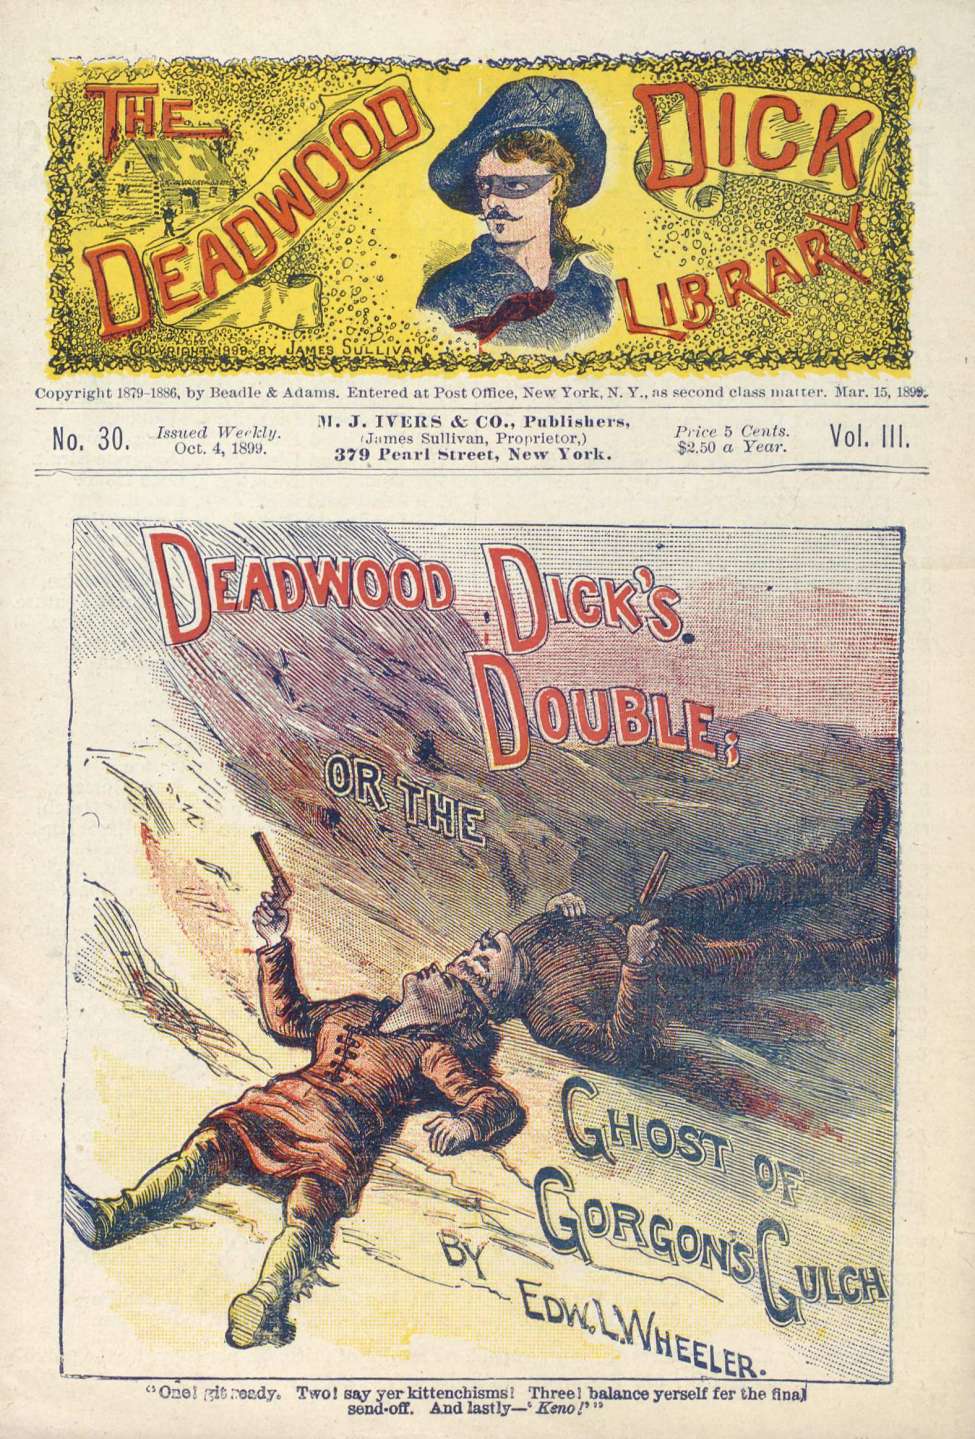 Book Cover For Deadwood Dick Library v2 30 - Deadwood Dick's Double